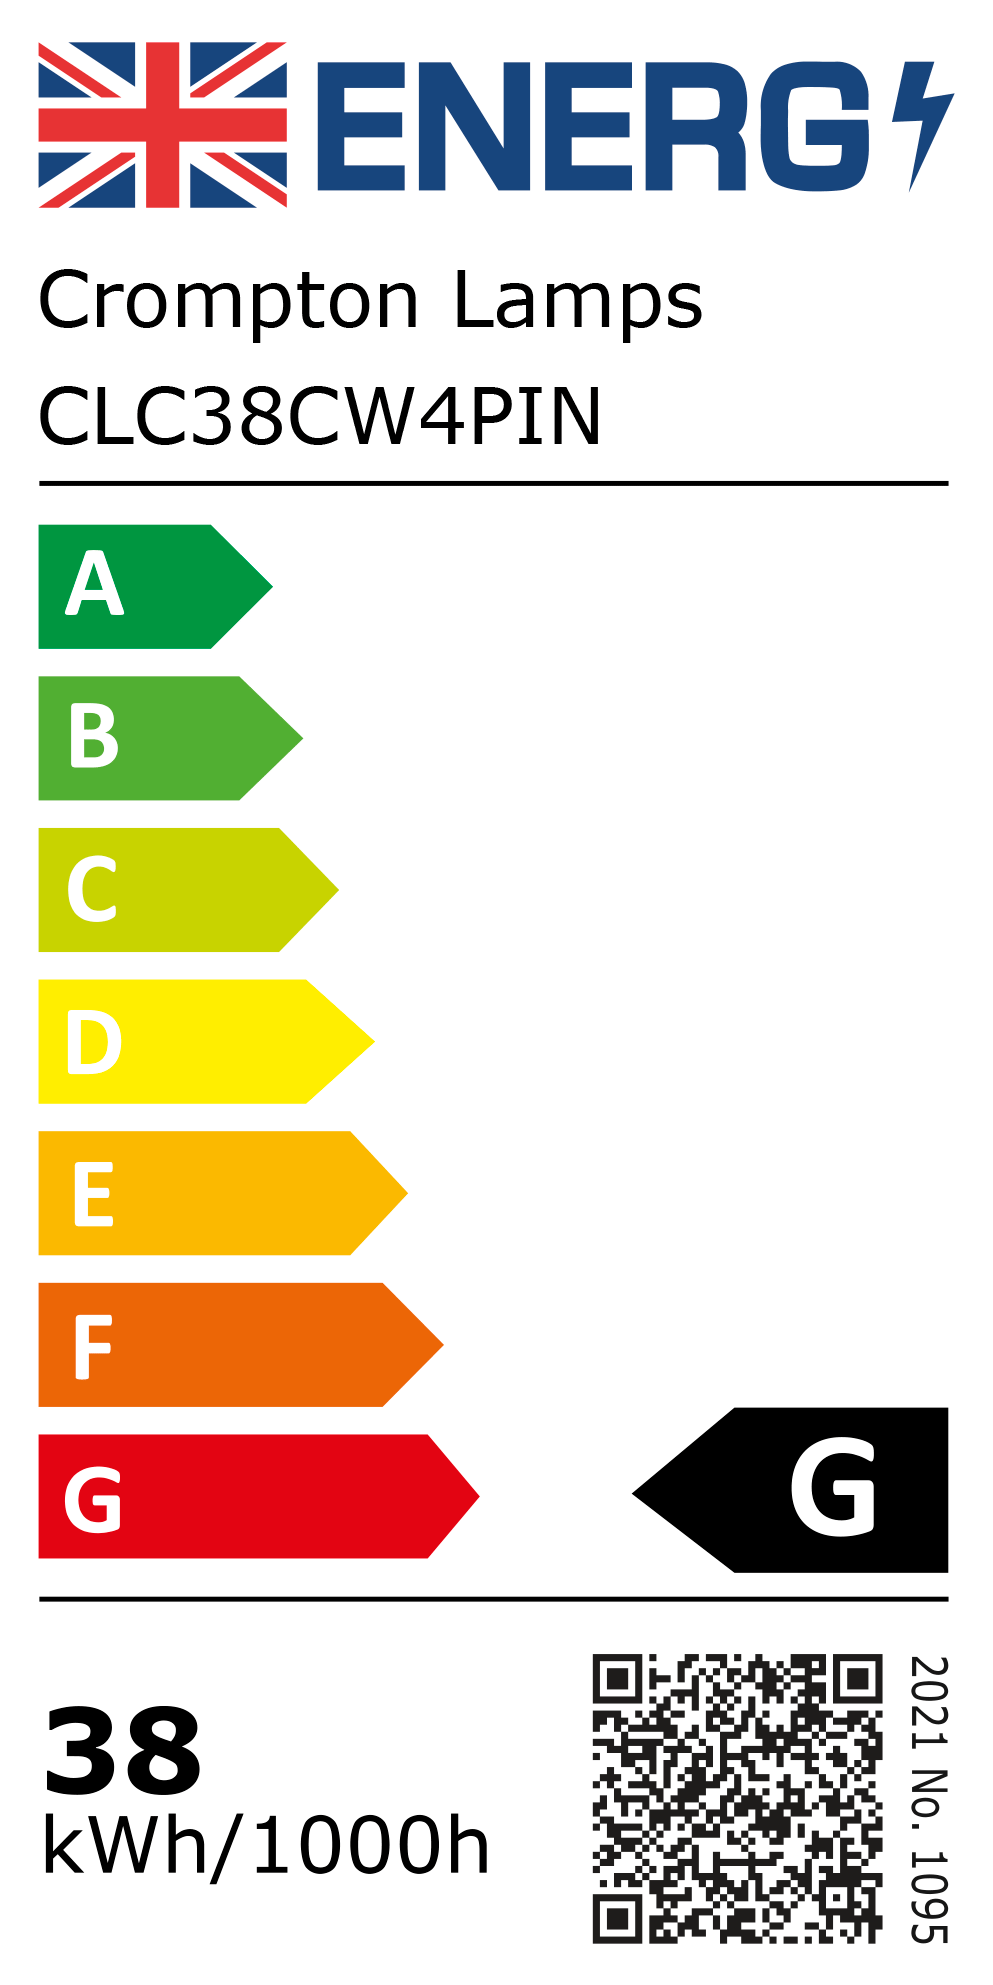 New 2021 Energy Rating Label: Stock Code CLC38CW4PIN